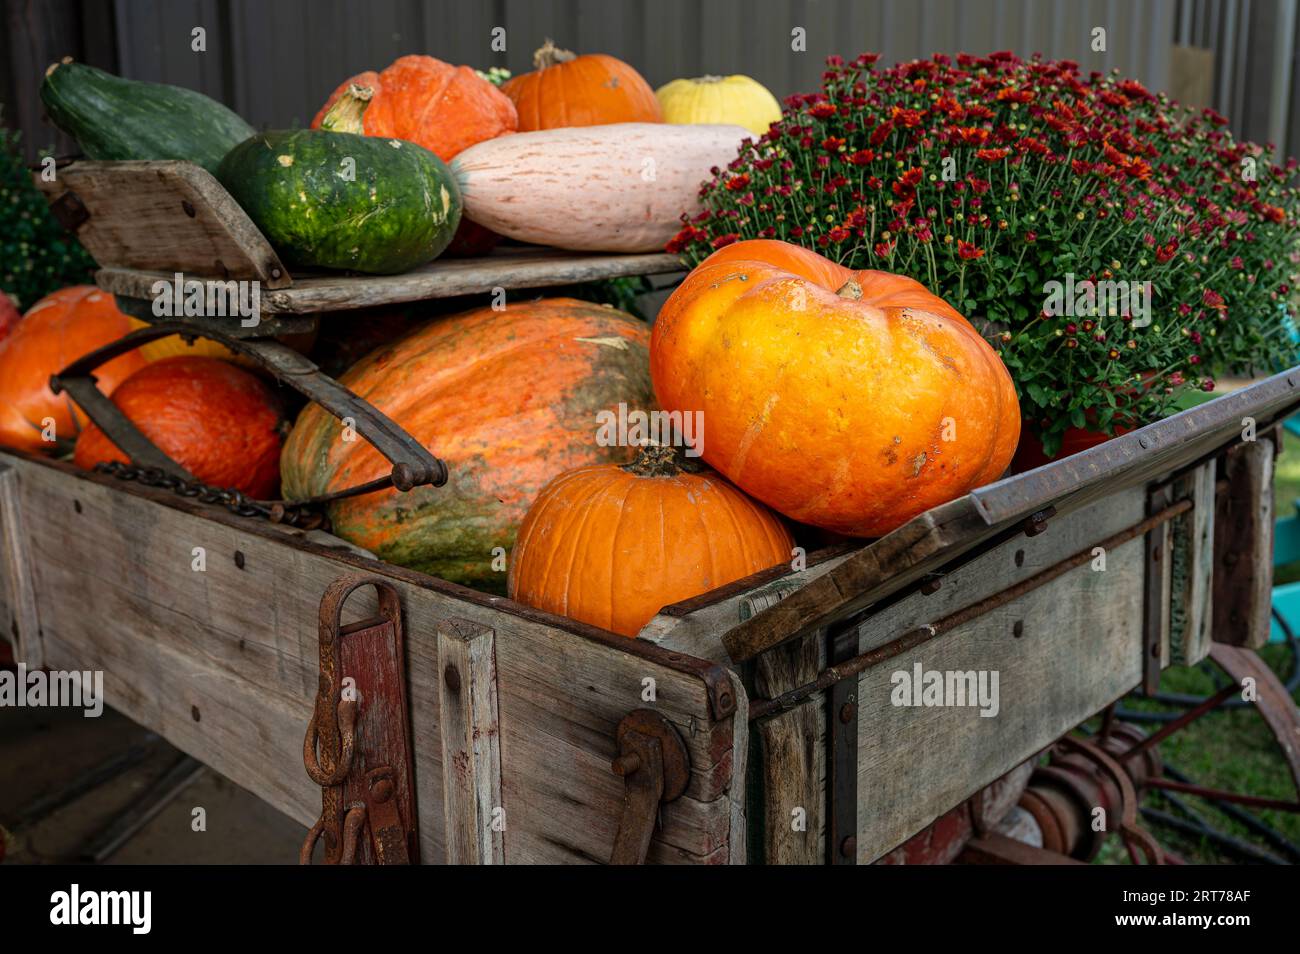 Pumpkins and gourds a Fall or Autumn favorite for the Halloween and Thanksgiving holiday decoration or decorating in Alabama, USA. Stock Photo